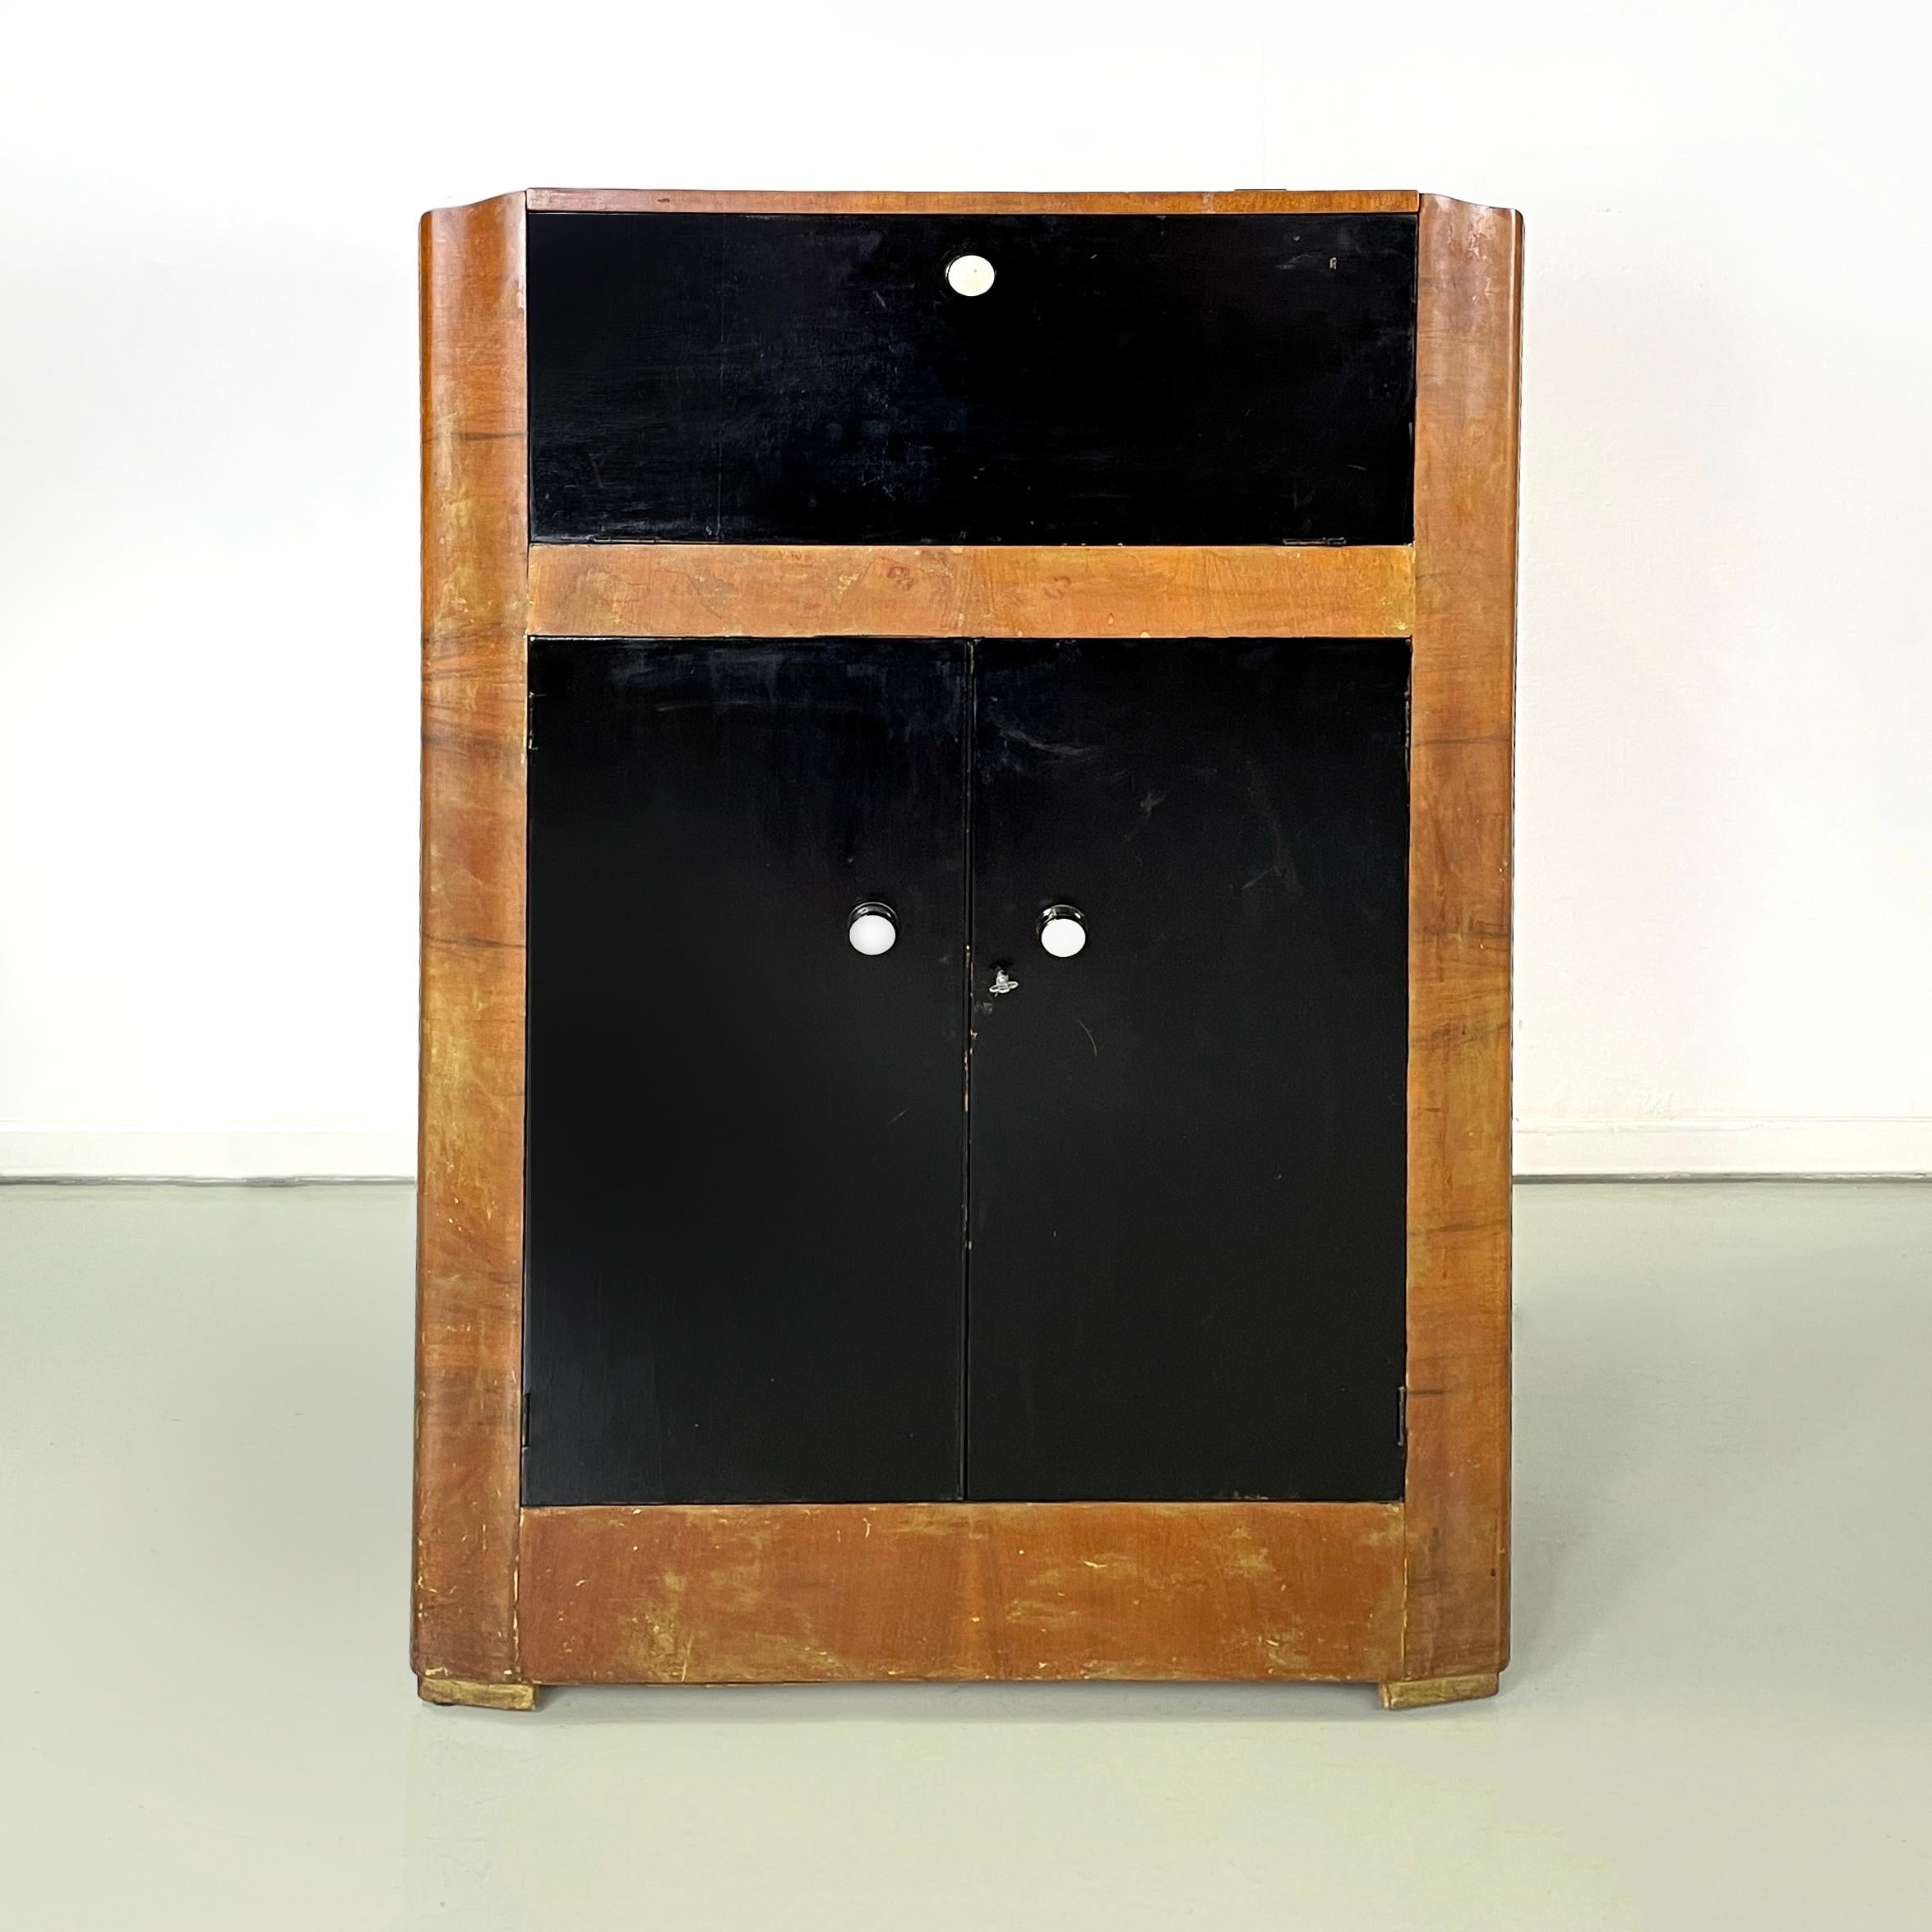 Italian art deco Wooden bar cabinet with lamp and mirrors, 1940s
Bar or cocktail cabinet with two compartments, entirely in natural color wood and black painted wood. The upper compartment has a double flap opening with an internal metal mechanism